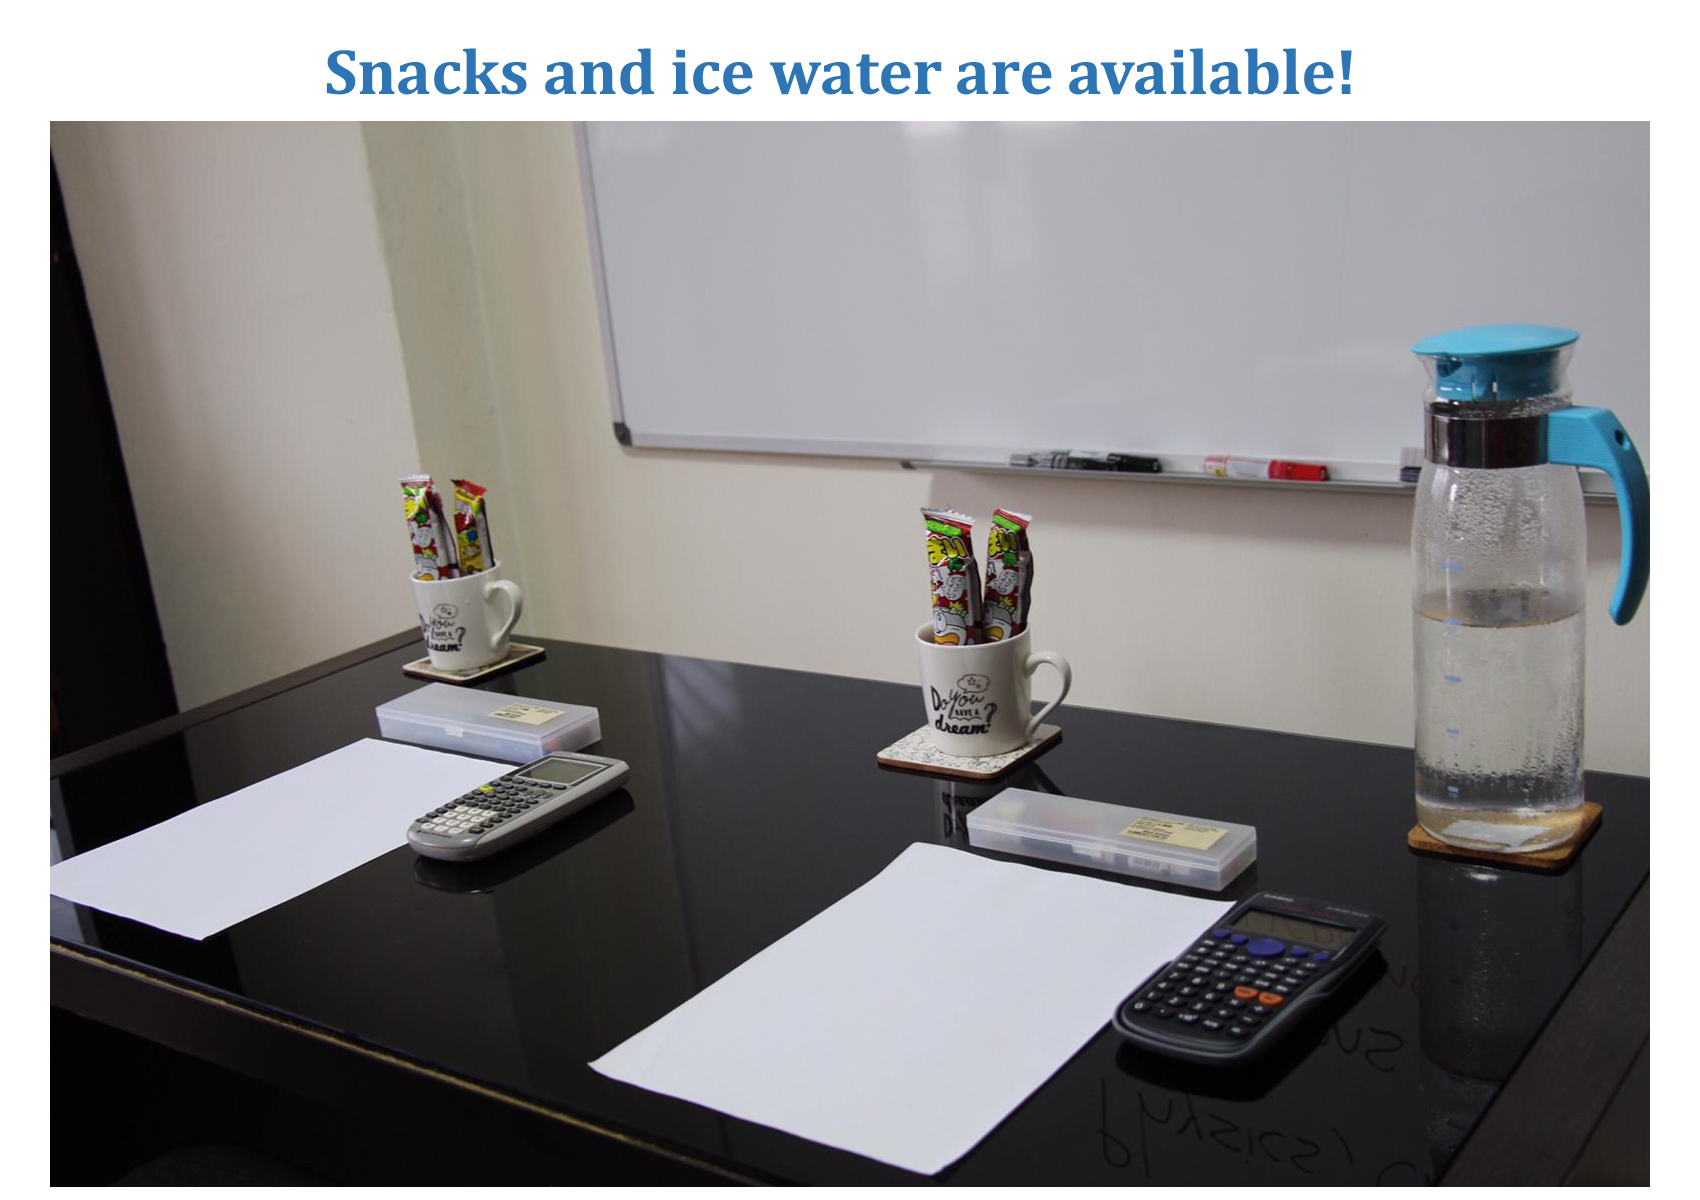 5. Snacks and ice water.jpg